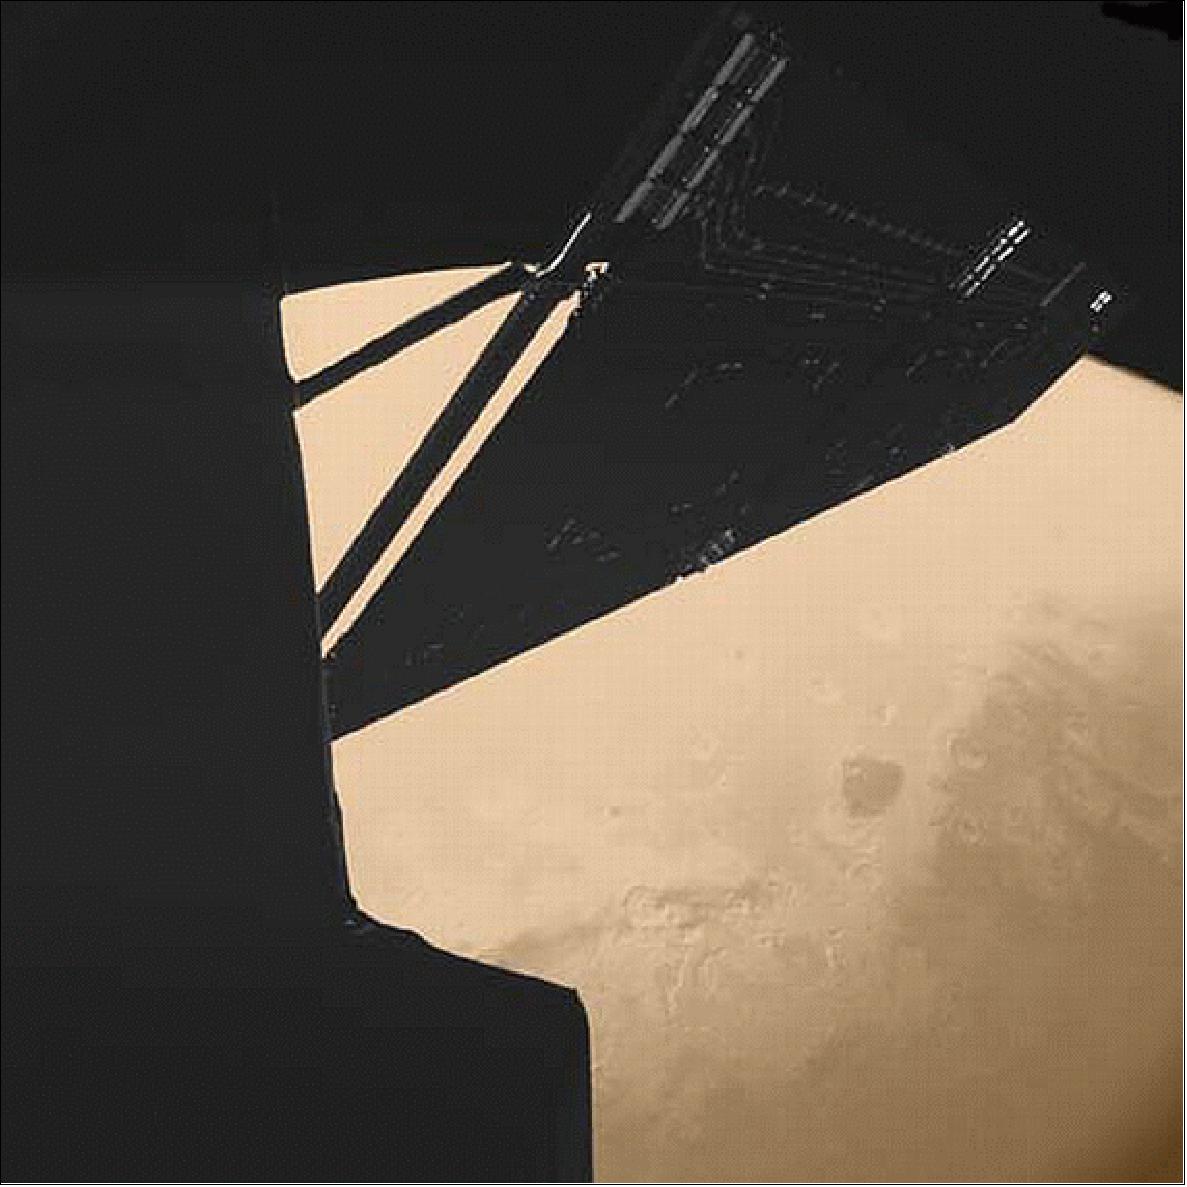 Figure 184: CIVA image of Mars acquired on Feb. 25, 2007 showing portions of the Rosetta spacecraft with Mars in the background (image credit: J. P. Bibring, CIVA, Philae, ESA)